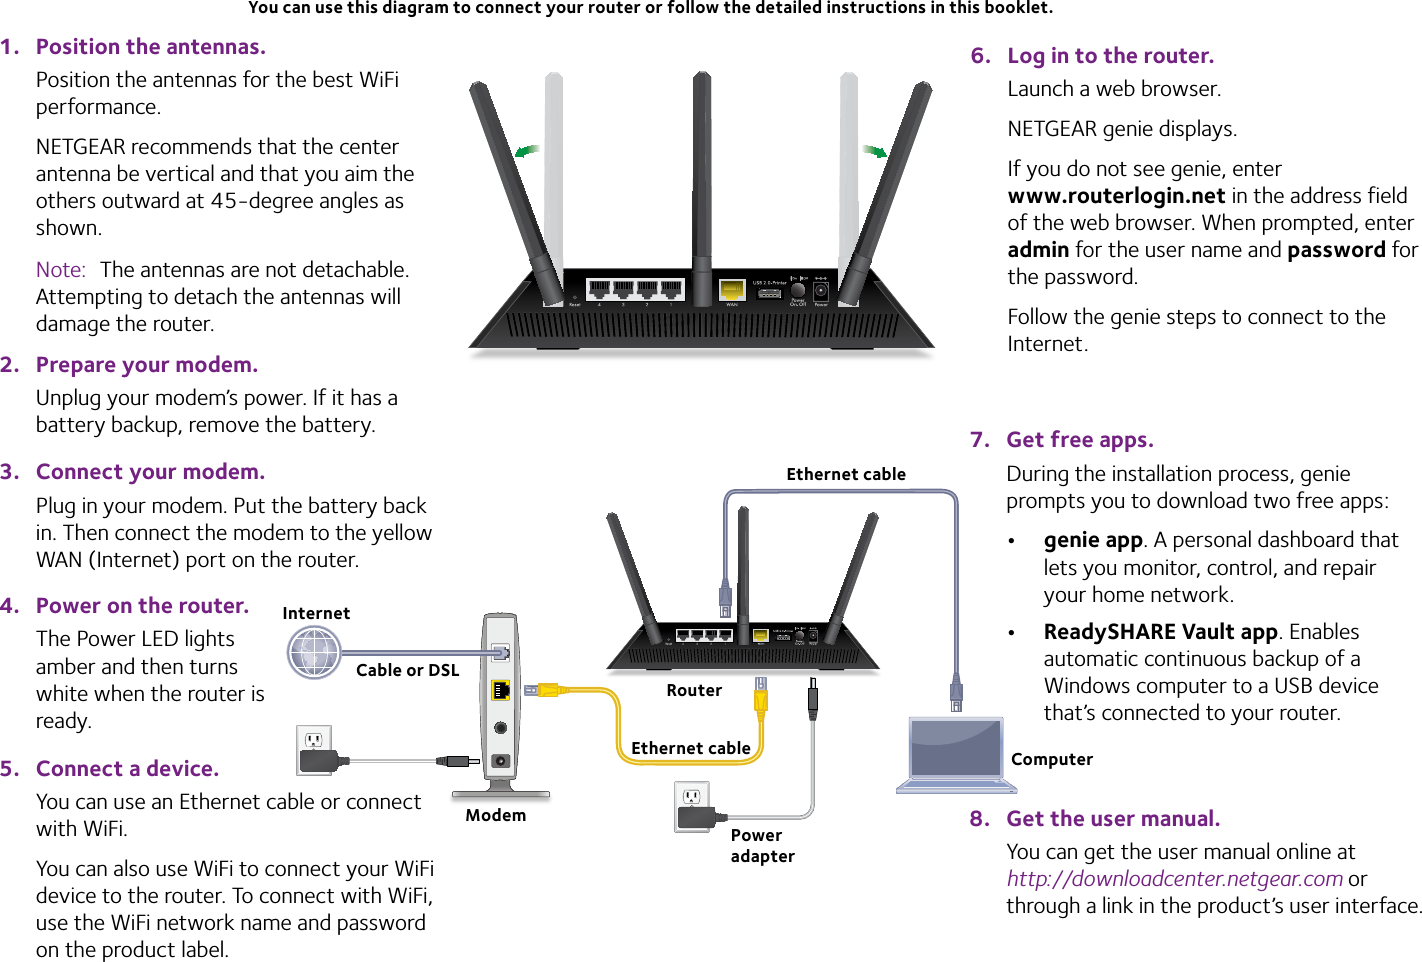 1.  Position the antennas.Position the antennas for the best WiFi performance.NETGEAR recommends that the center antenna be vertical and that you aim the others outward at 45‑degree angles as shown.Note:  The antennas are not detachable. Attempting to detach the antennas will damage the router.2.  Prepare your modem.Unplug your modem’s power. If it has a battery backup, remove the battery.3.  Connect your modem.Plug in your modem. Put the battery back in. Then connect the modem to the yellow WAN (Internet) port on the router.4.  Power on the router.The Power LED lights amber and then turns white when the router is ready.5.  Connect a device.You can use an Ethernet cable or connect with WiFi. You can also use WiFi to connect your WiFi device to the router. To connect with WiFi, use the WiFi network name and password on the product label.6.  Log in to the router.Launch a web browser.NETGEAR genie displays.If you do not see genie, enter www.routerlogin.net in the address field of the web browser. When prompted, enter admin for the user name and password for the password.Follow the genie steps to connect to the Internet.8.  Get the user manual.You can get the user manual online at http://downloadcenter.netgear.com or through a link in the product’s user interface.RouterEthernet cableCable or DSLInternetModemPower adapterYou can use this diagram to connect your router or follow the detailed instructions in this booklet.7.  Get free apps.During the installation process, genie prompts you to download two free apps:• genie app. A personal dashboard that lets you monitor, control, and repair your home network.• ReadySHARE Vault app. Enables automatic continuous backup of a Windows computer to a USB device that’s connected to your router.Ethernet cableComputer